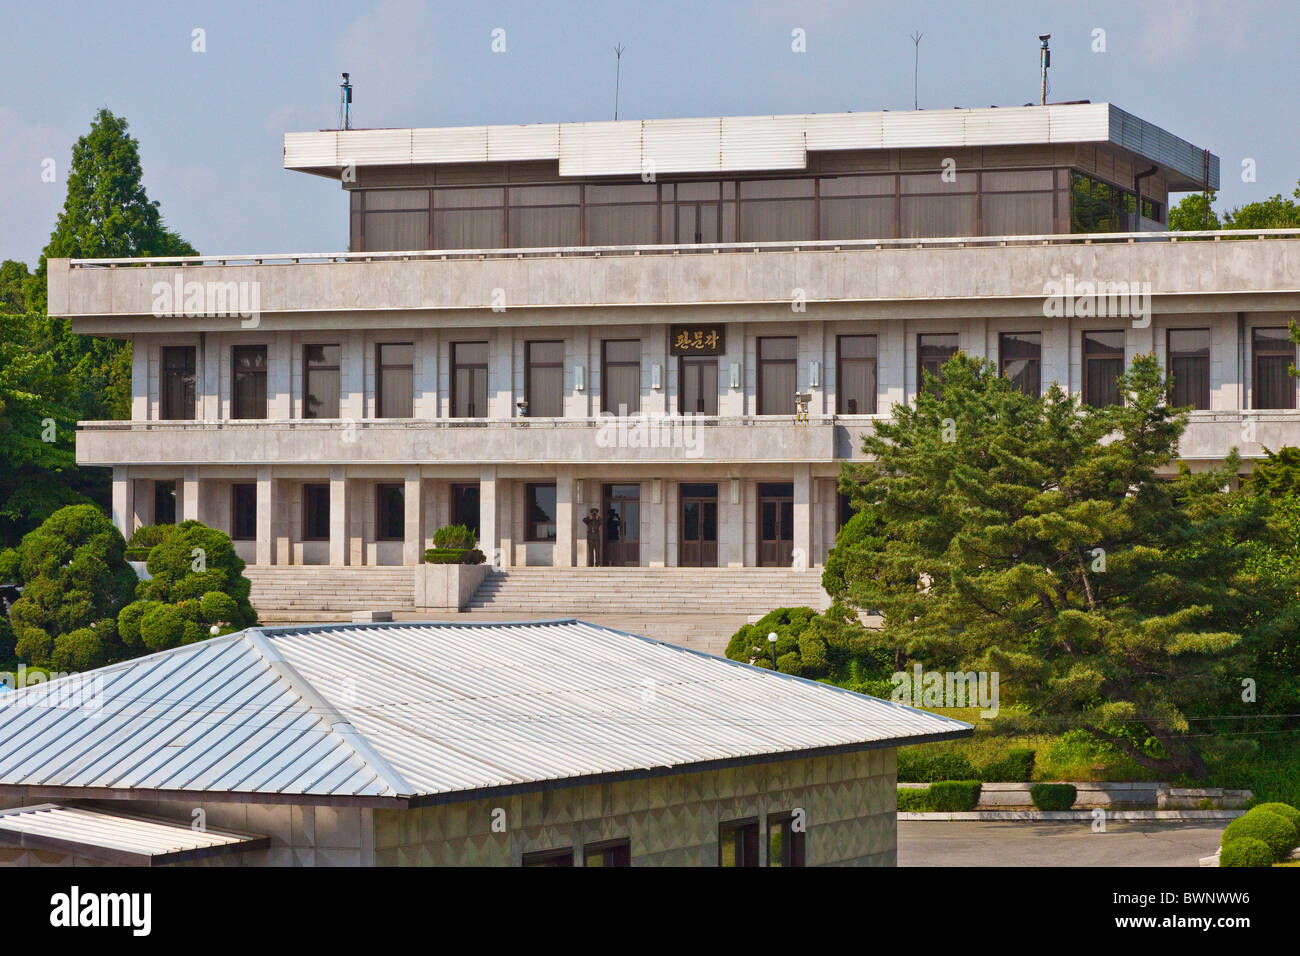 Panmon Hall North Korean building in DMZ Demilitarized Zone, with North Korean soldier, seen from South Korean side. JMH3834 Stock Photo